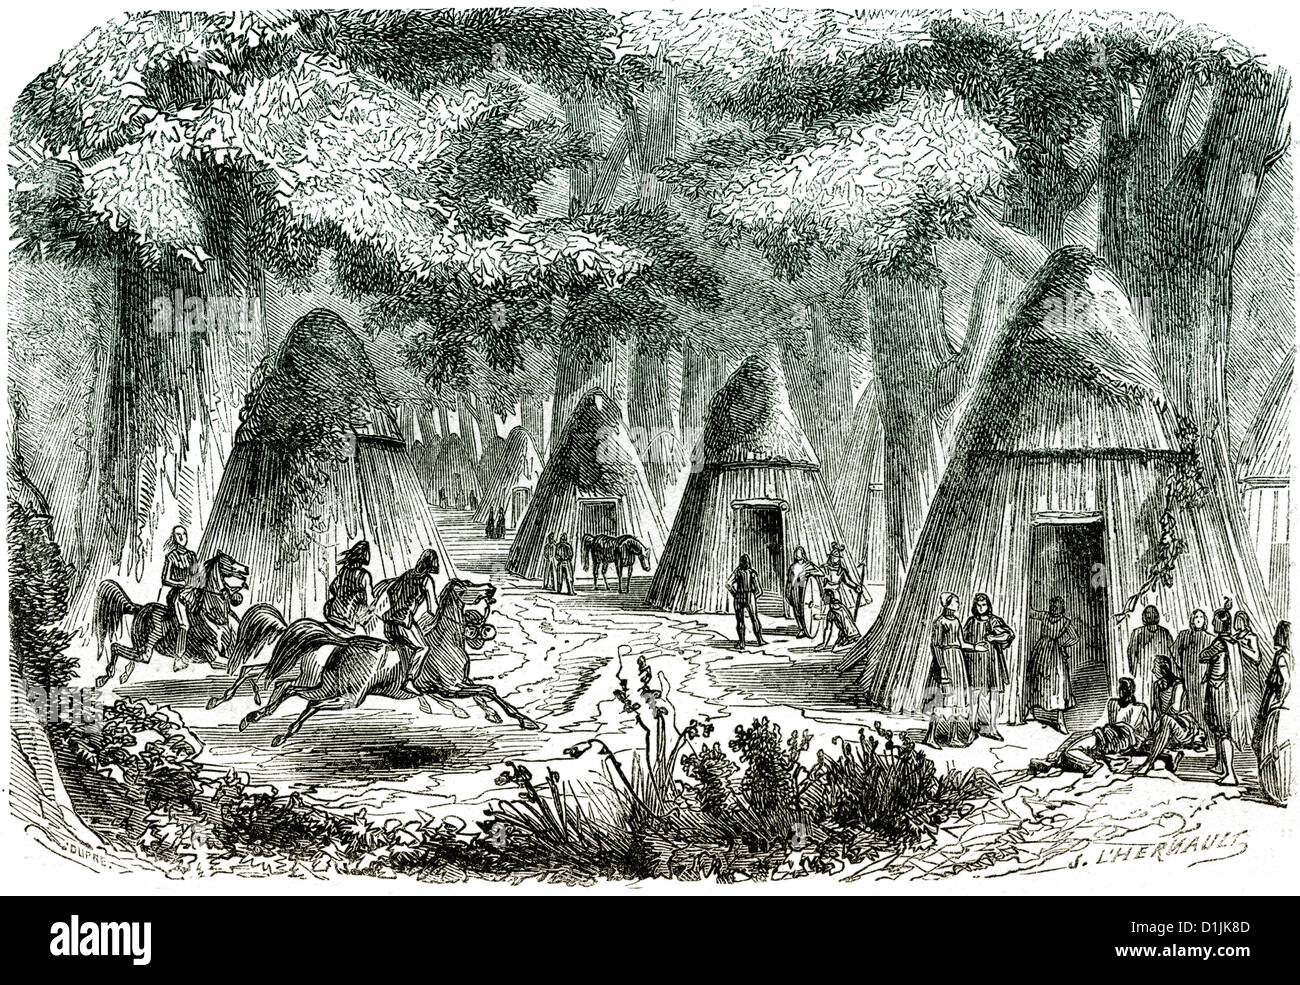 19th century, scene from the history of France, a Gallic village in the forest, around 100 BC, Stock Photo